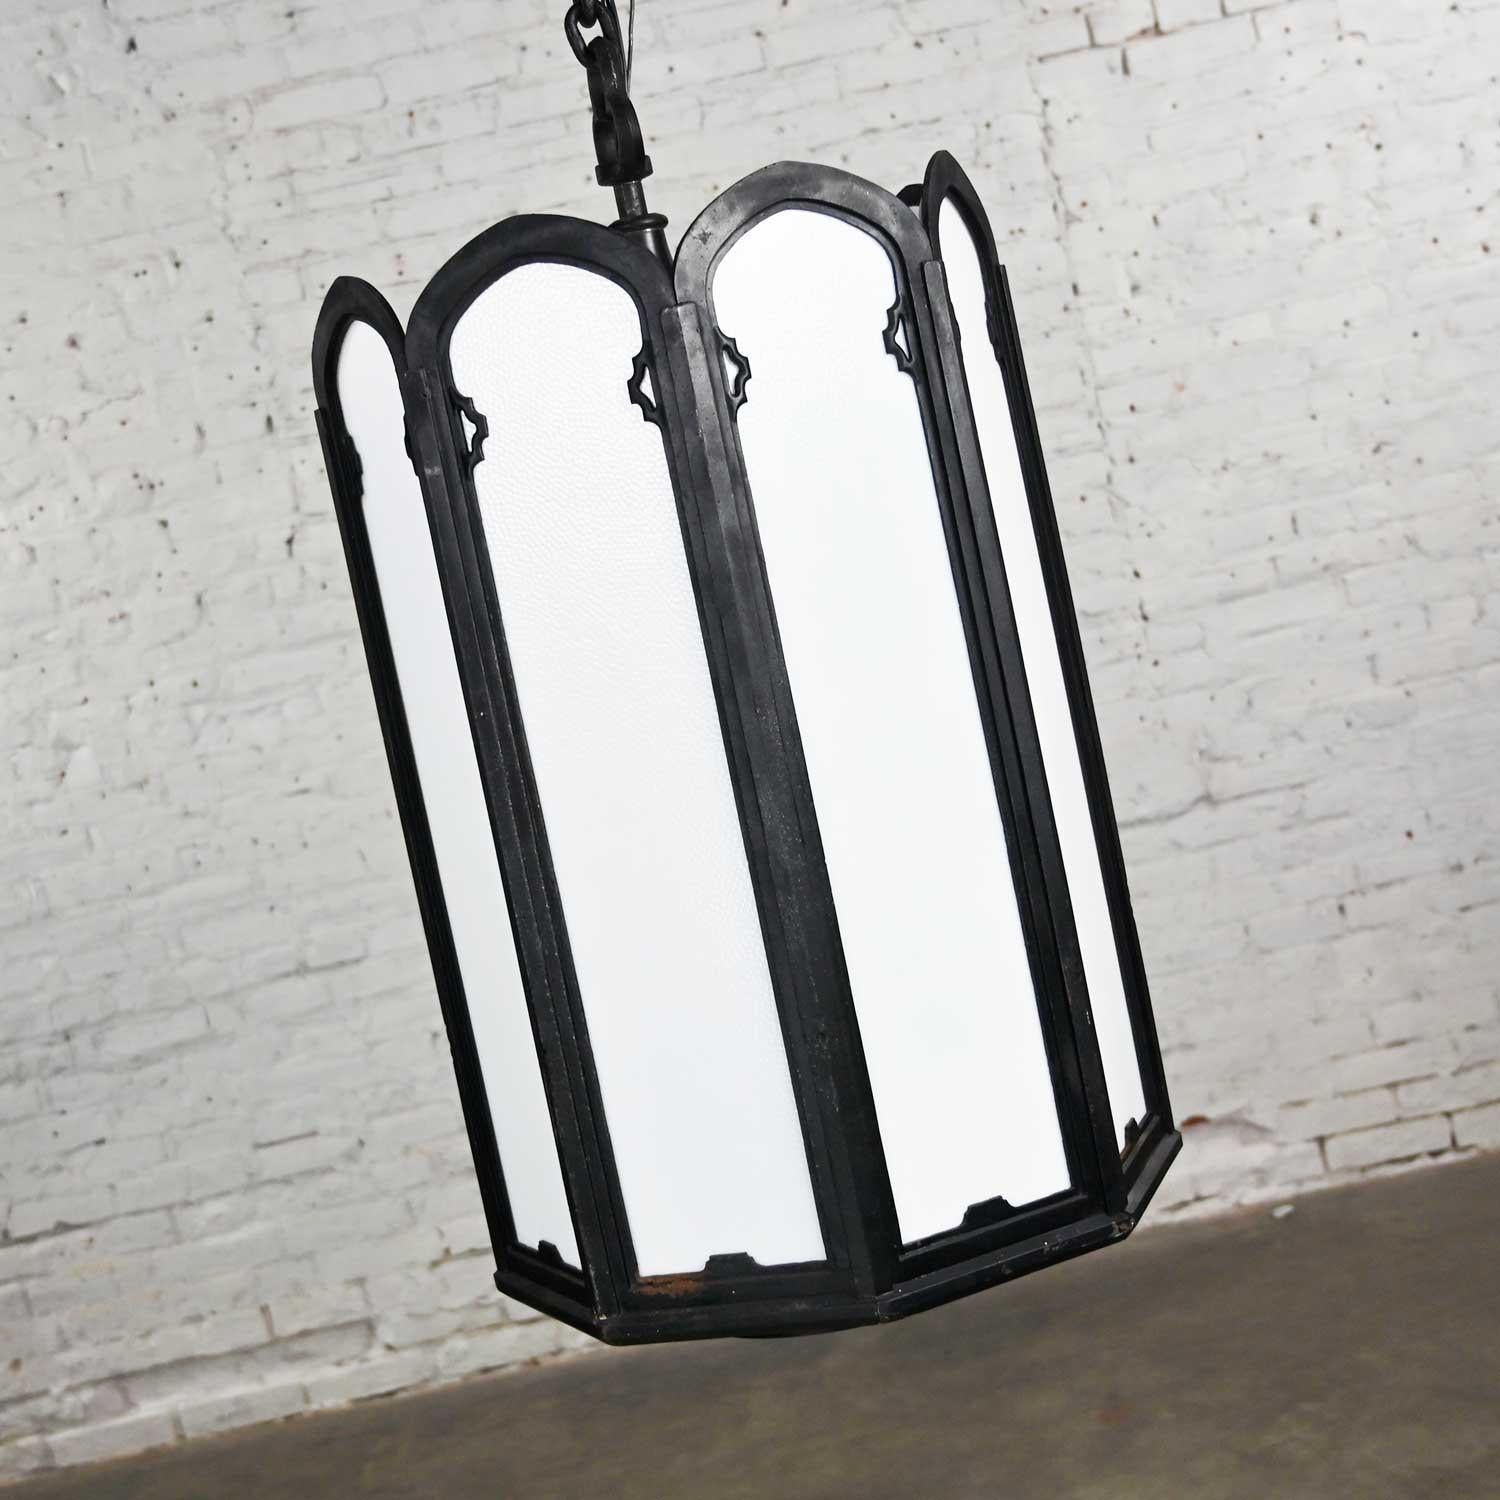 Large Vintage Gothic or Art Deco Black Wrought Iron & White Milk Glass Lights For Sale 3